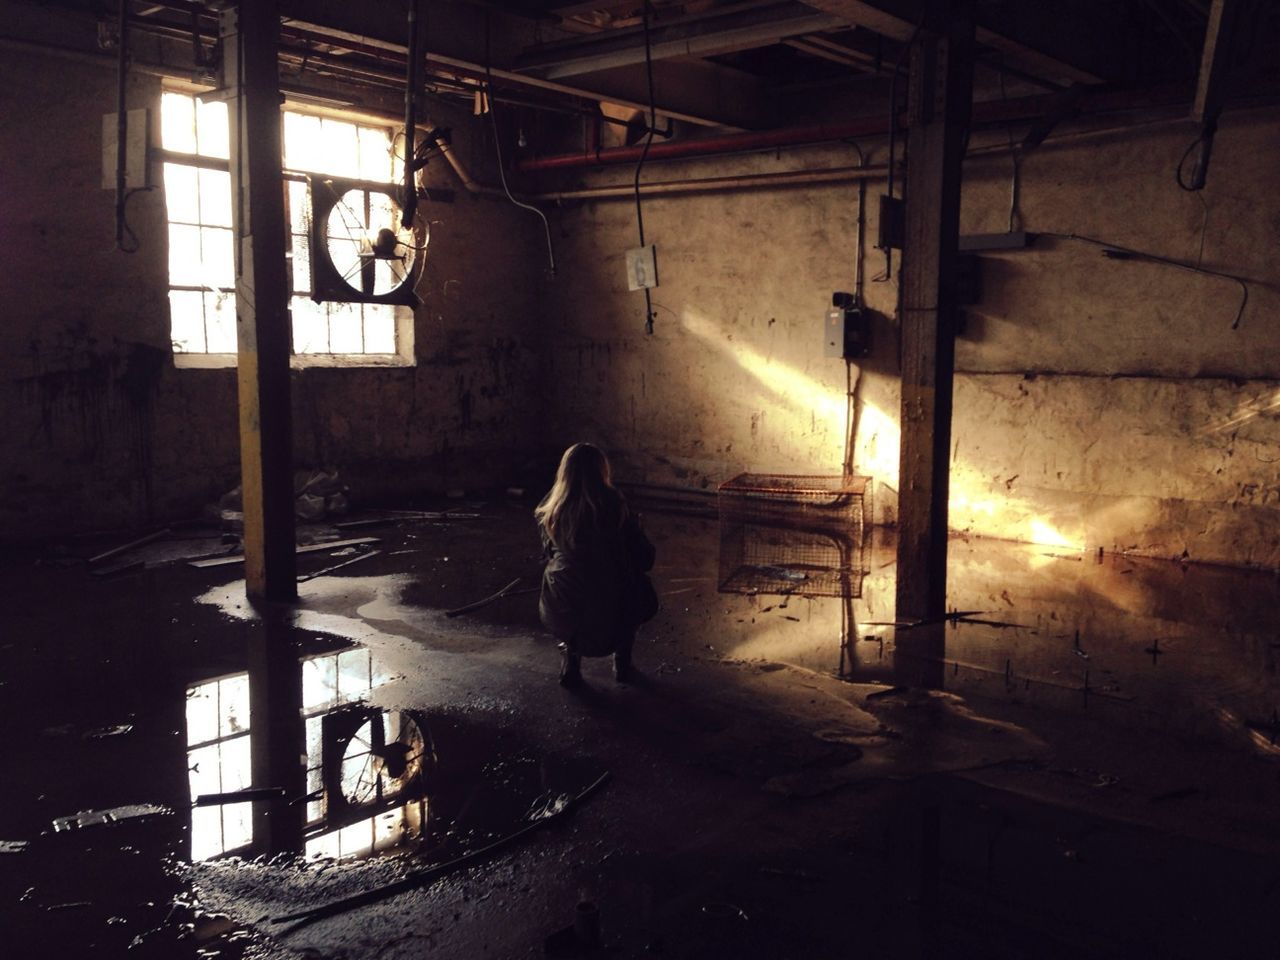 Woman crouching on wet abandoned building